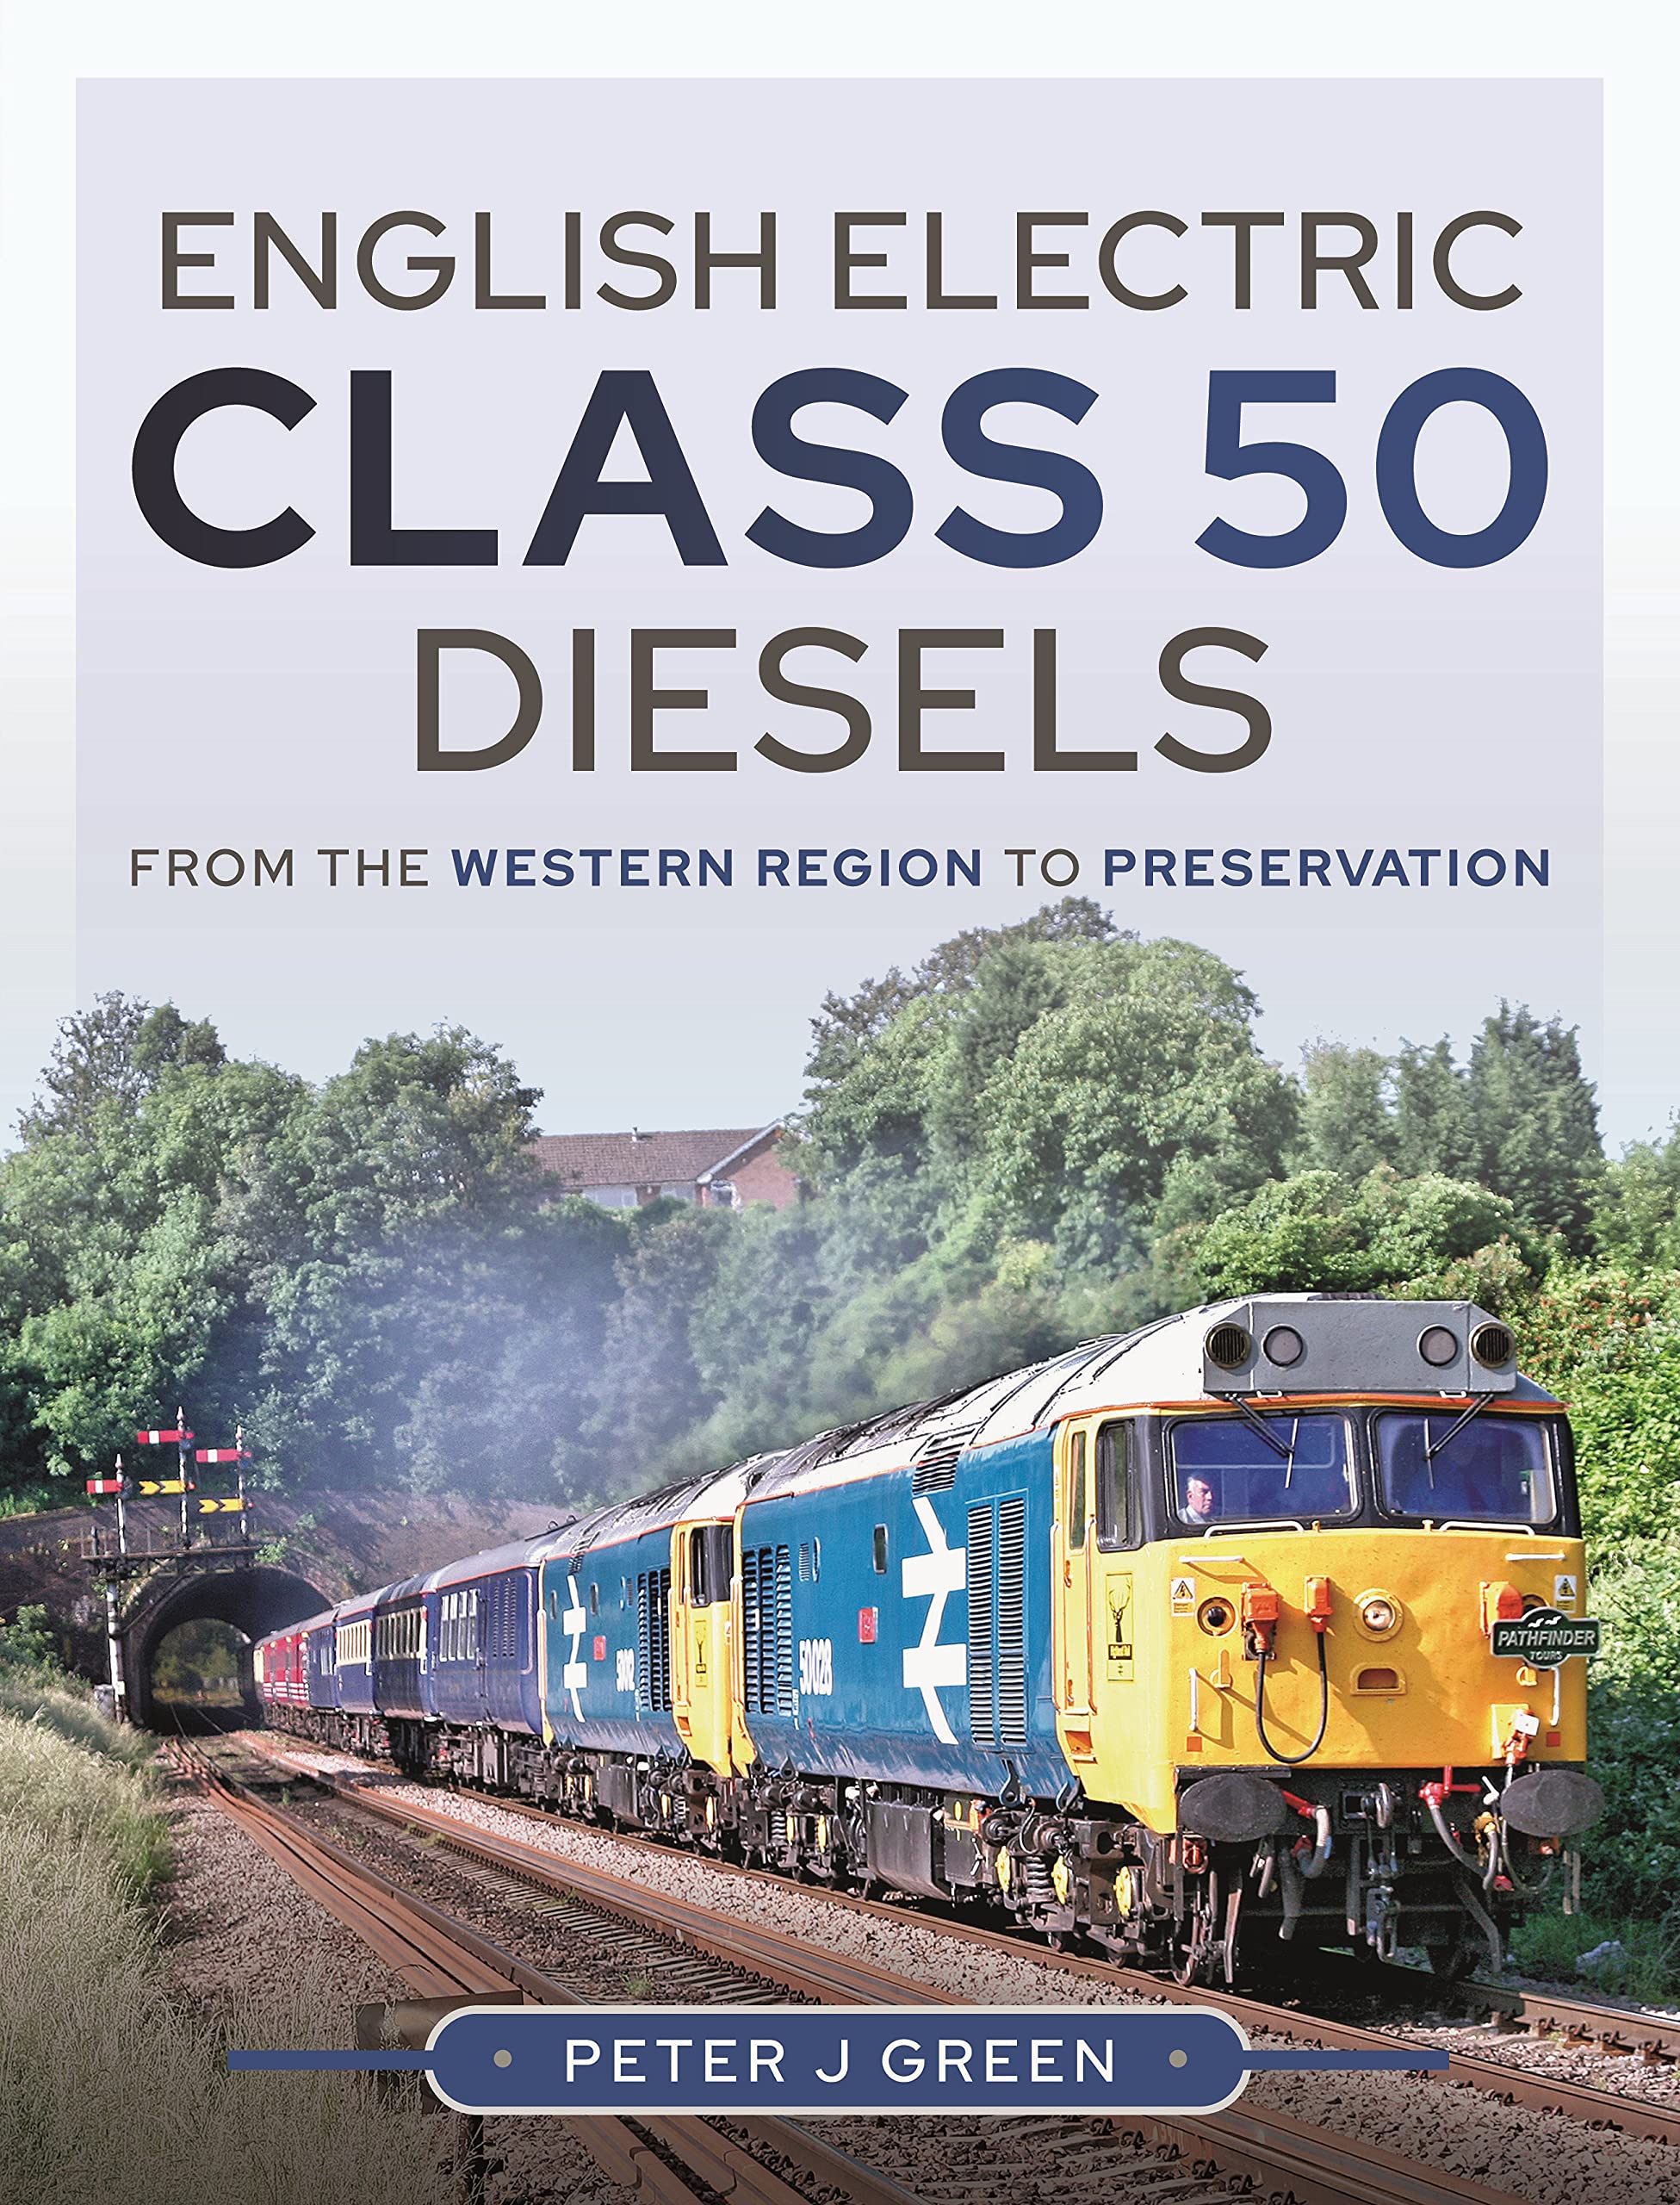 English Electric Class 50 Diesels from the Western Region to Preservation